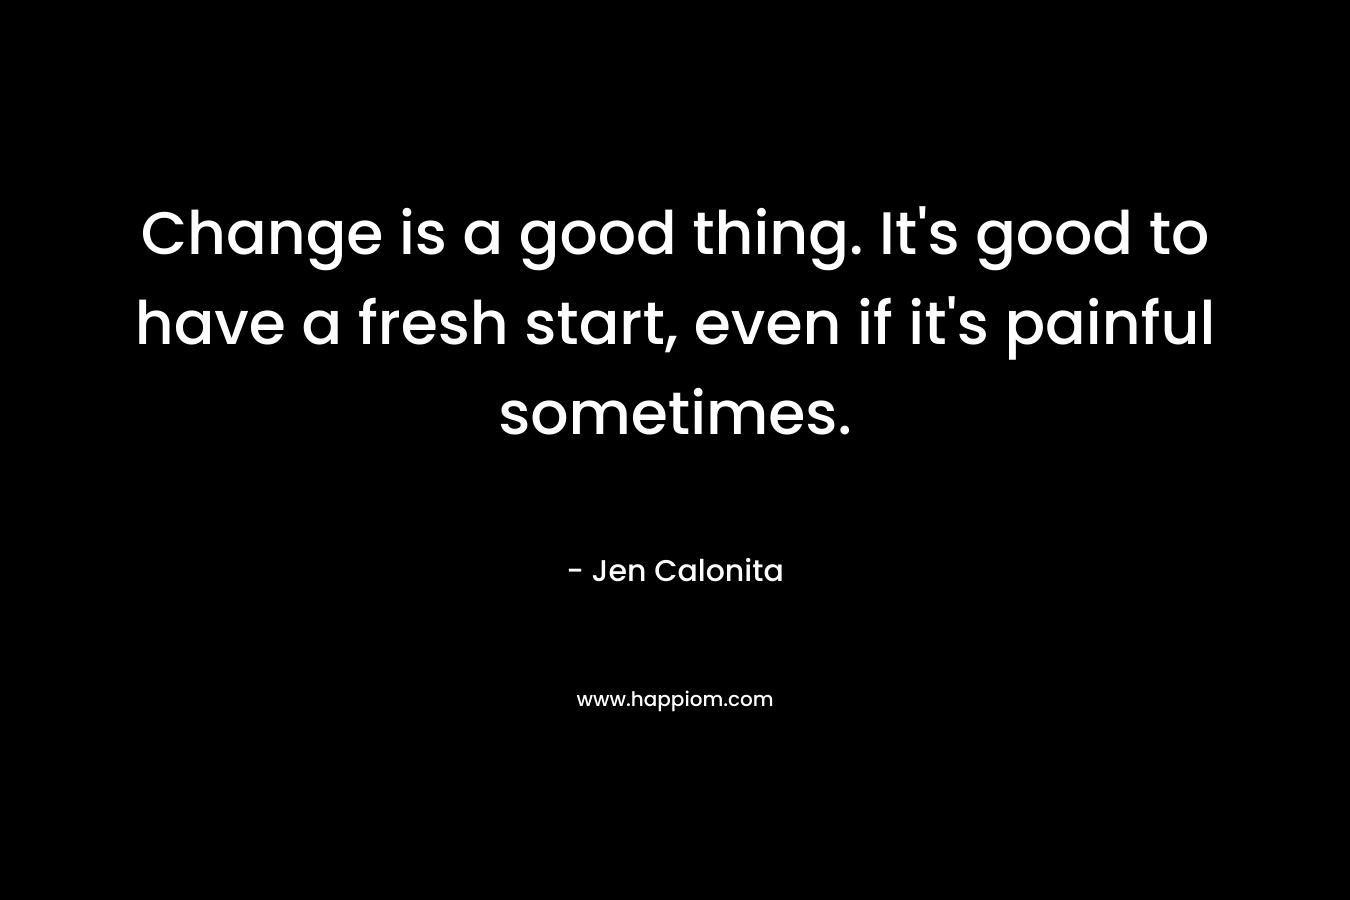 Change is a good thing. It's good to have a fresh start, even if it's painful sometimes.